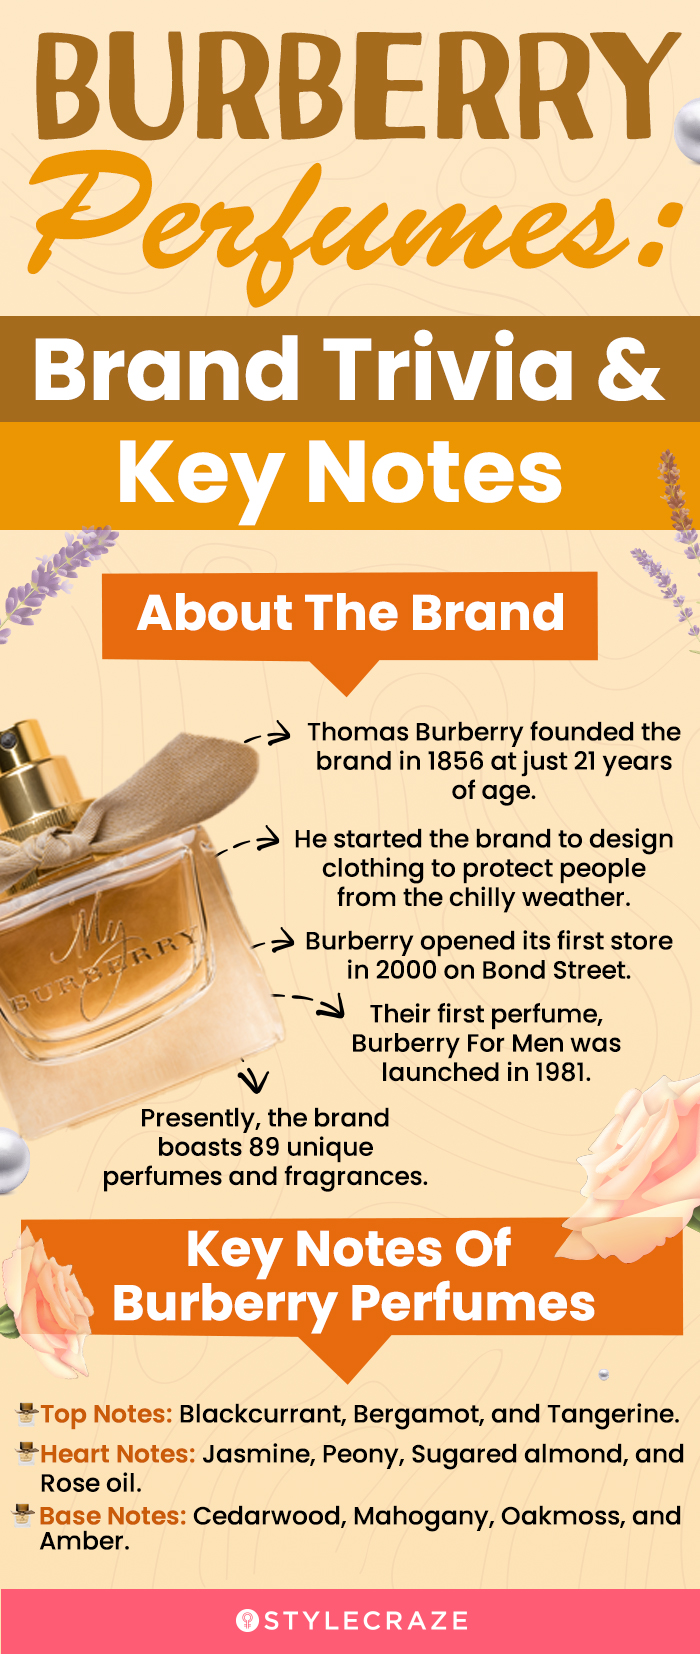 Burberry Perfumes: Brand Trivia & Key Notes (infographic)